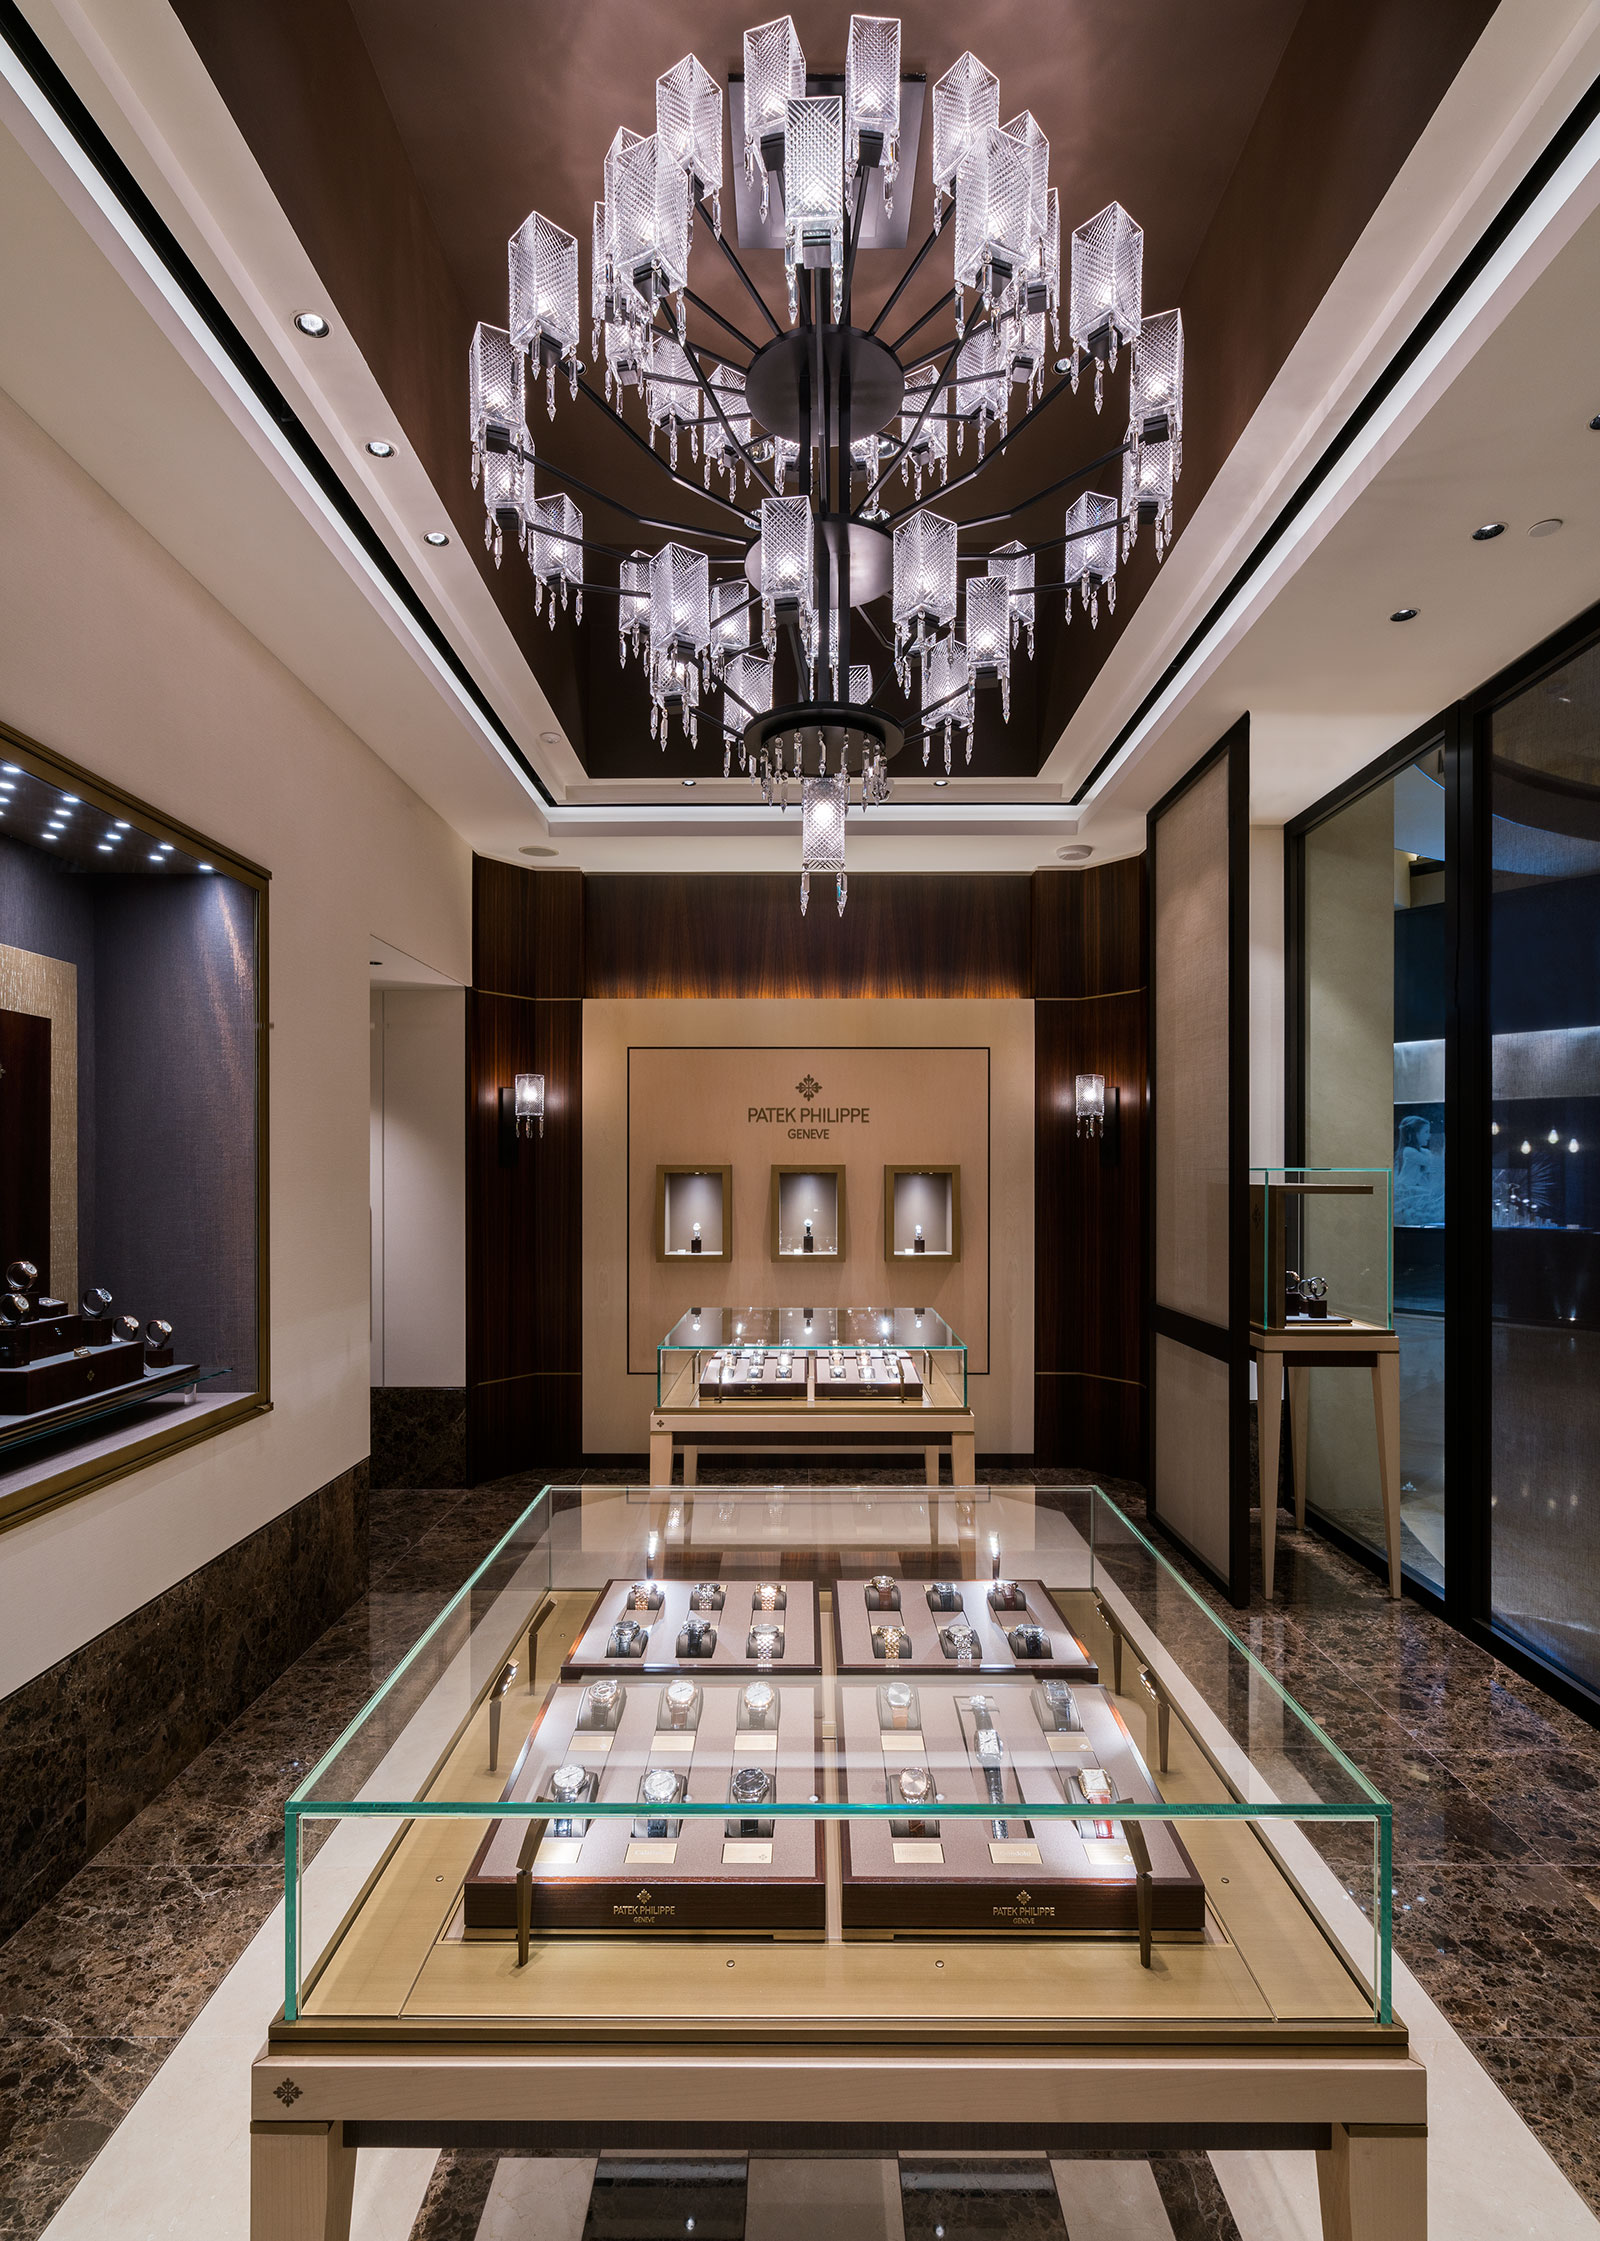 The newly reopened Patek Philippe boutique at Marina Bay Sands in Singapore